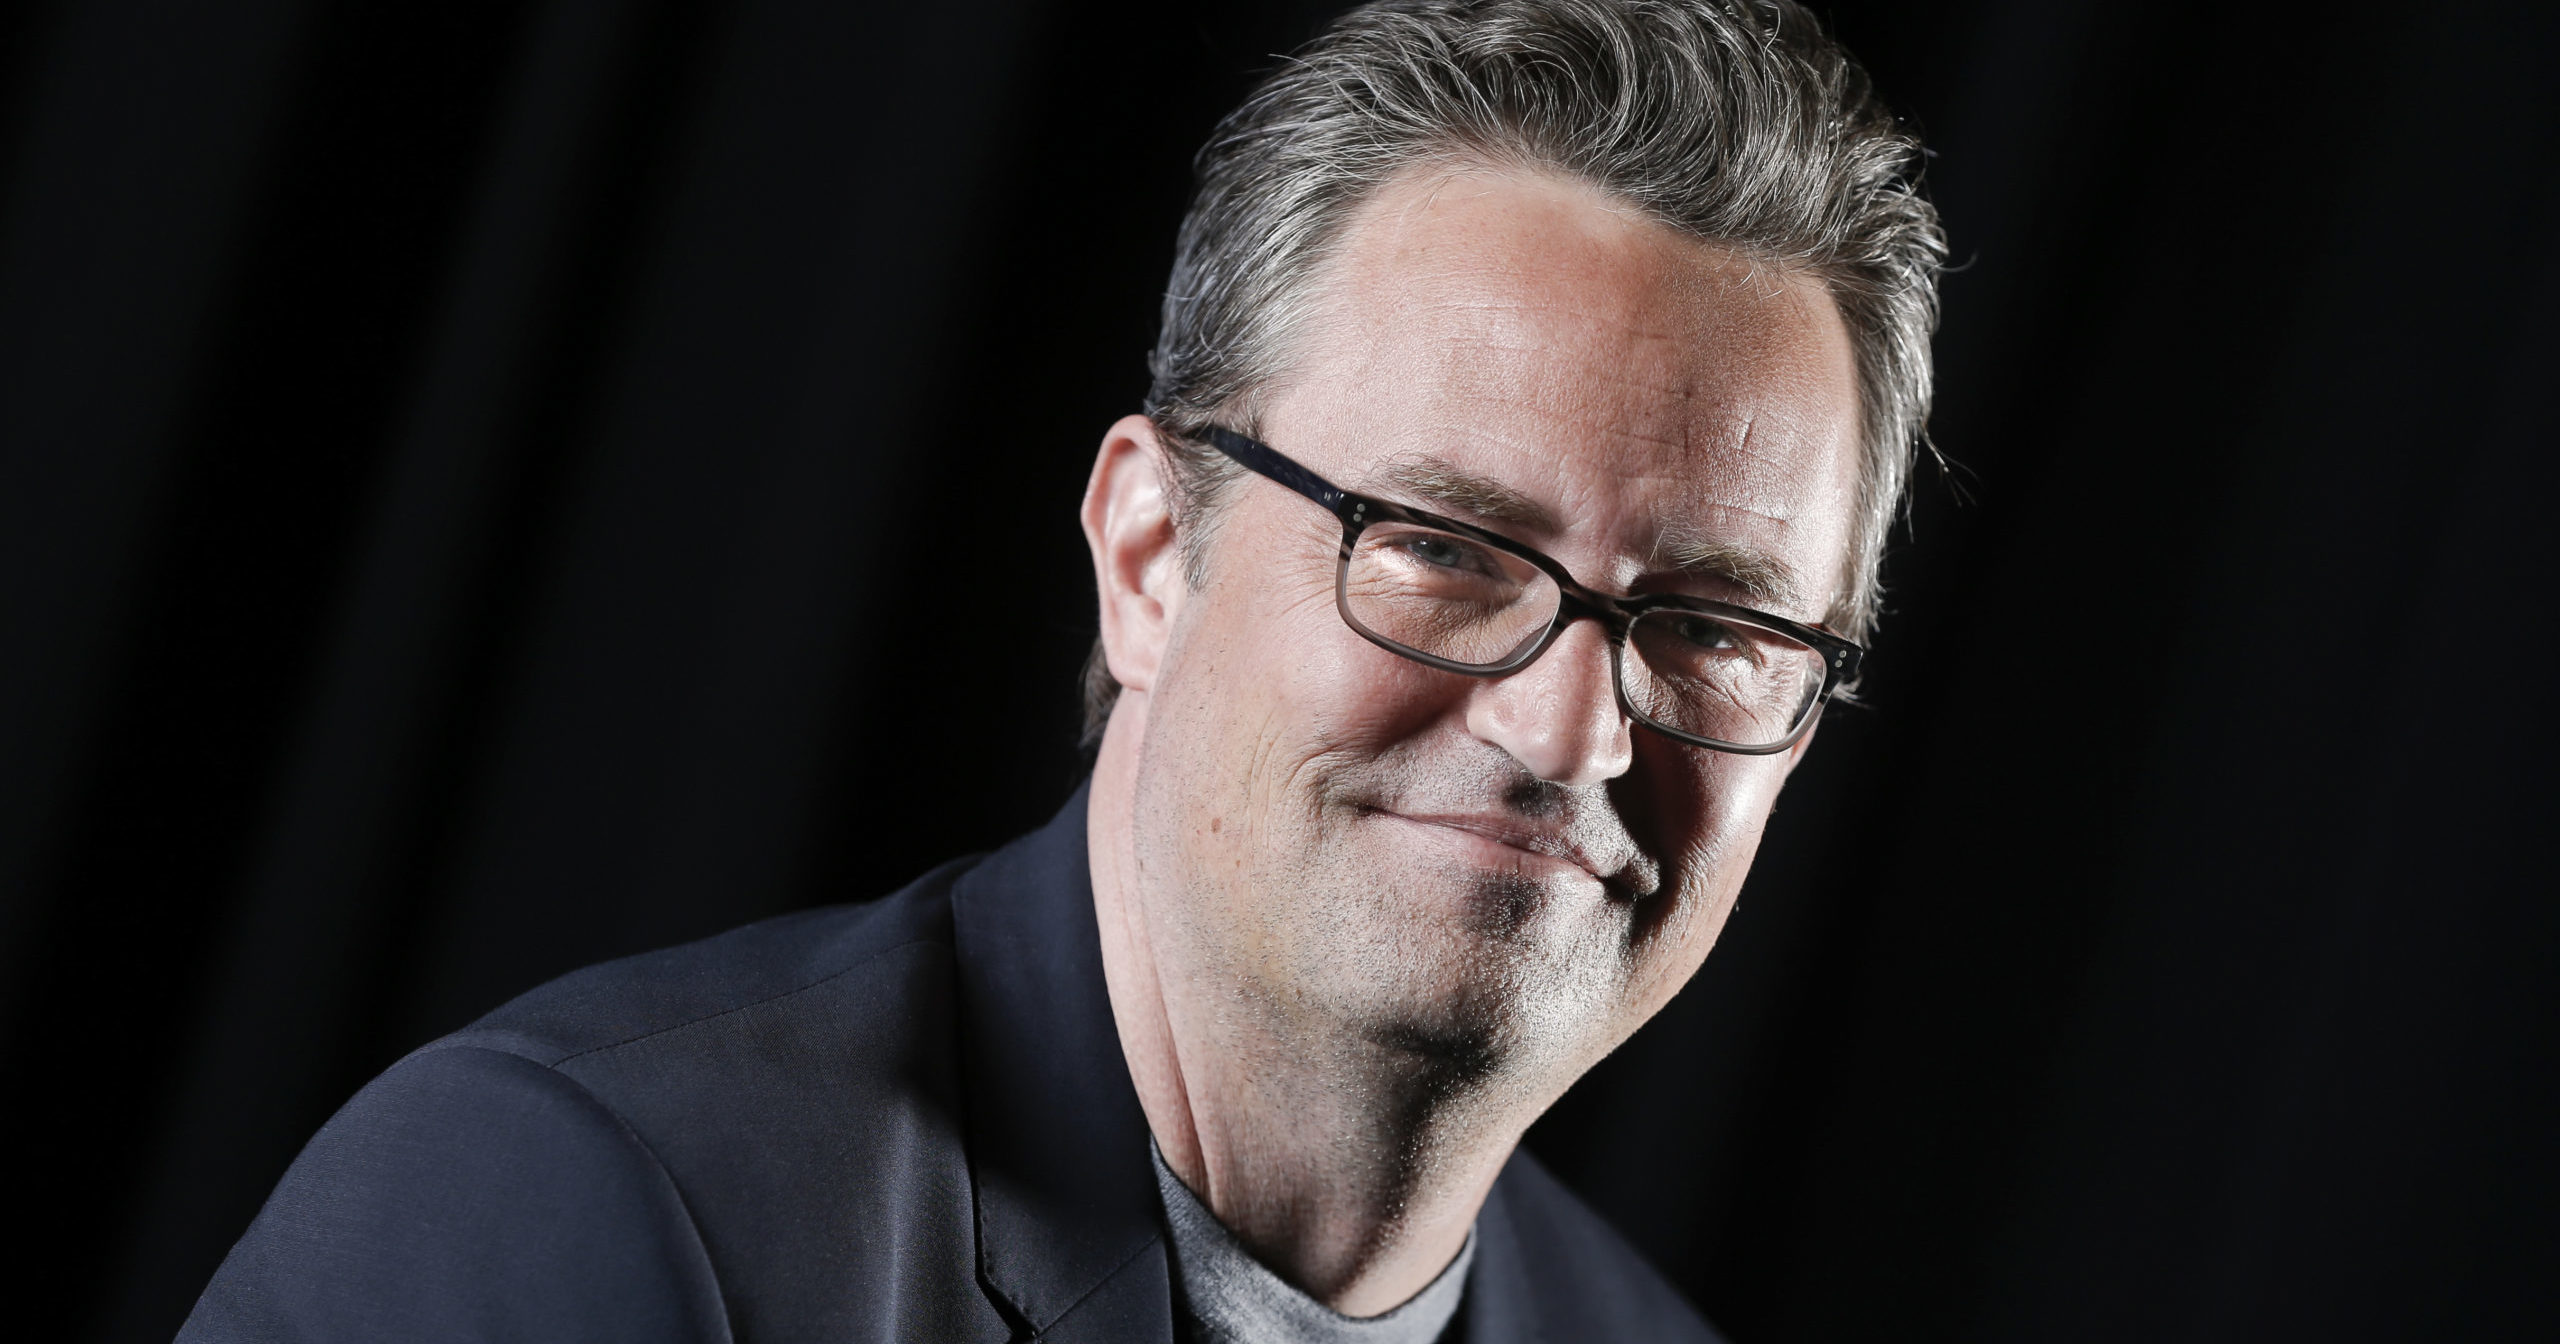 Matthew Perry poses for a portrait on Feb. 17, 2015, in New York.